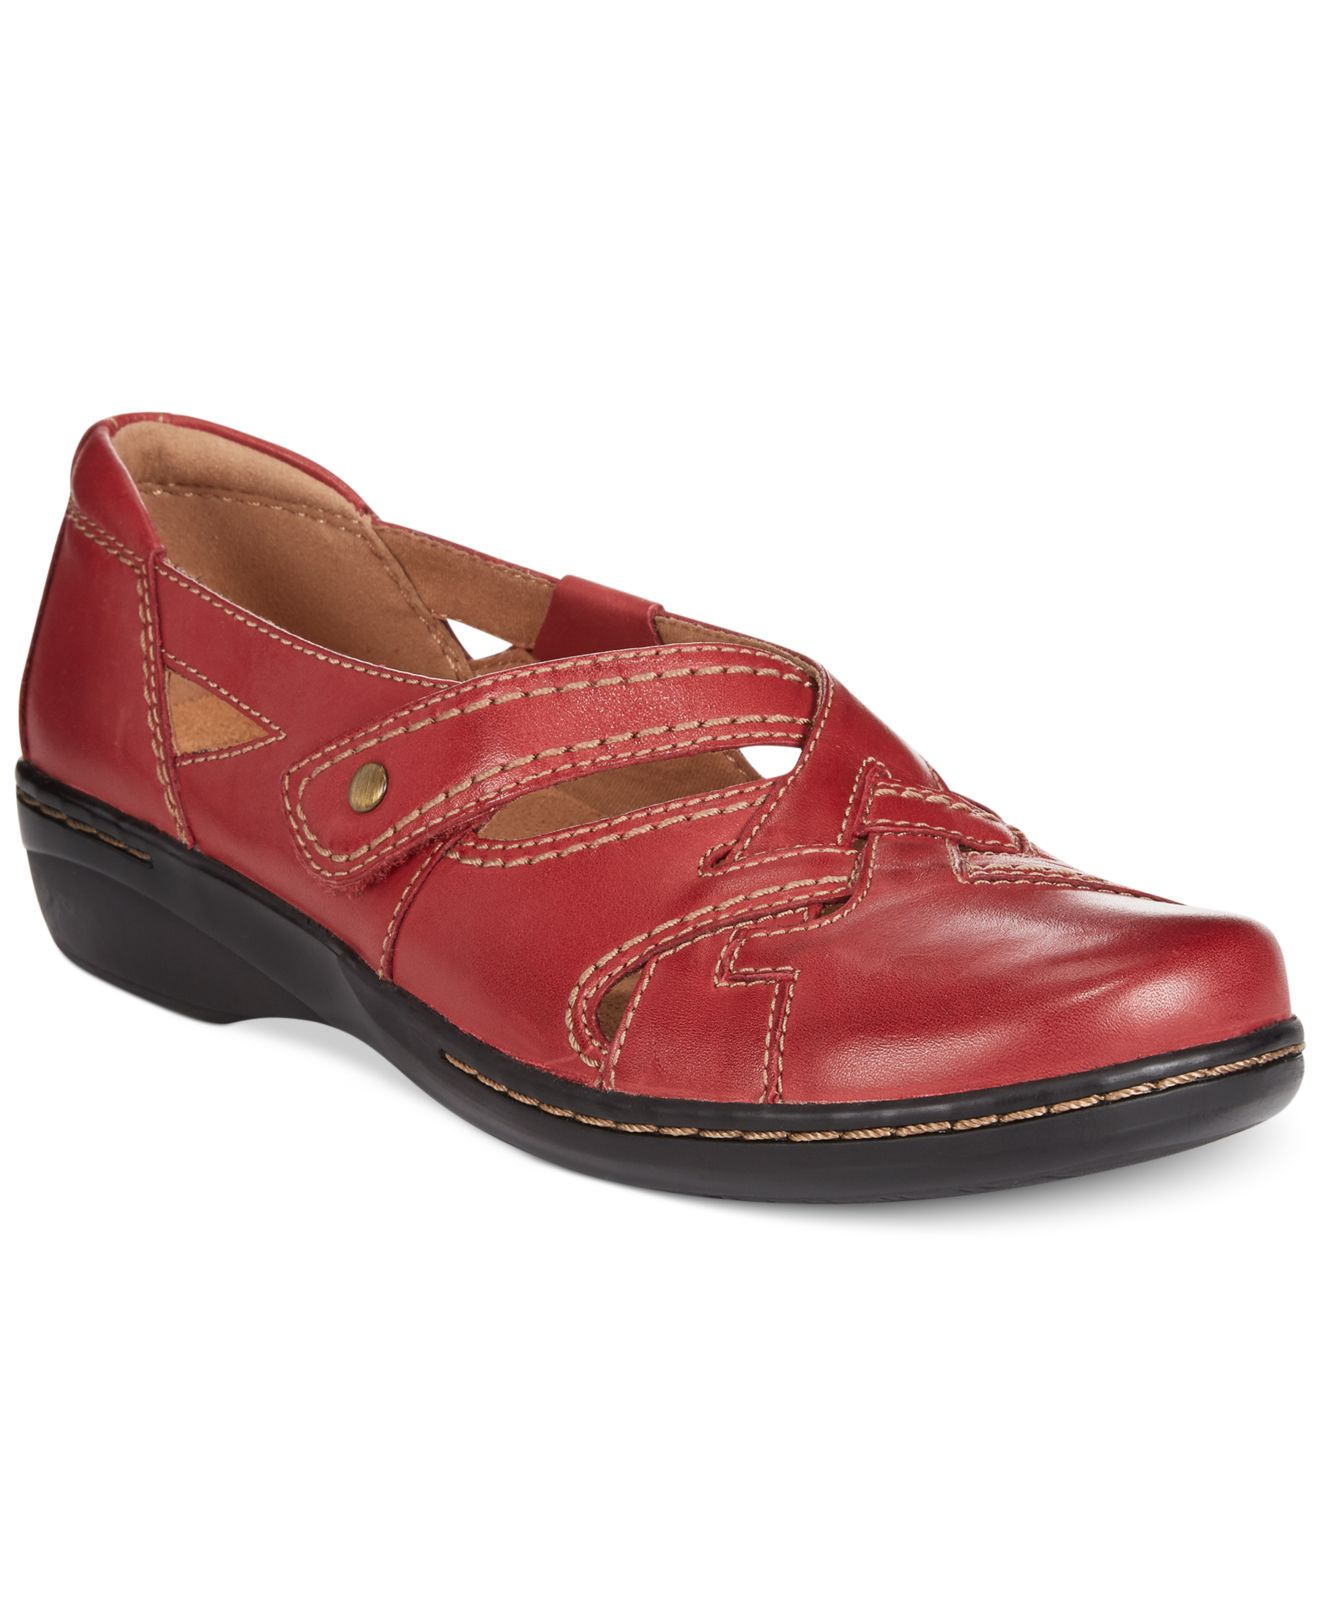 Clarks Collection Women's Evianna Peal Flats in Red - Lyst